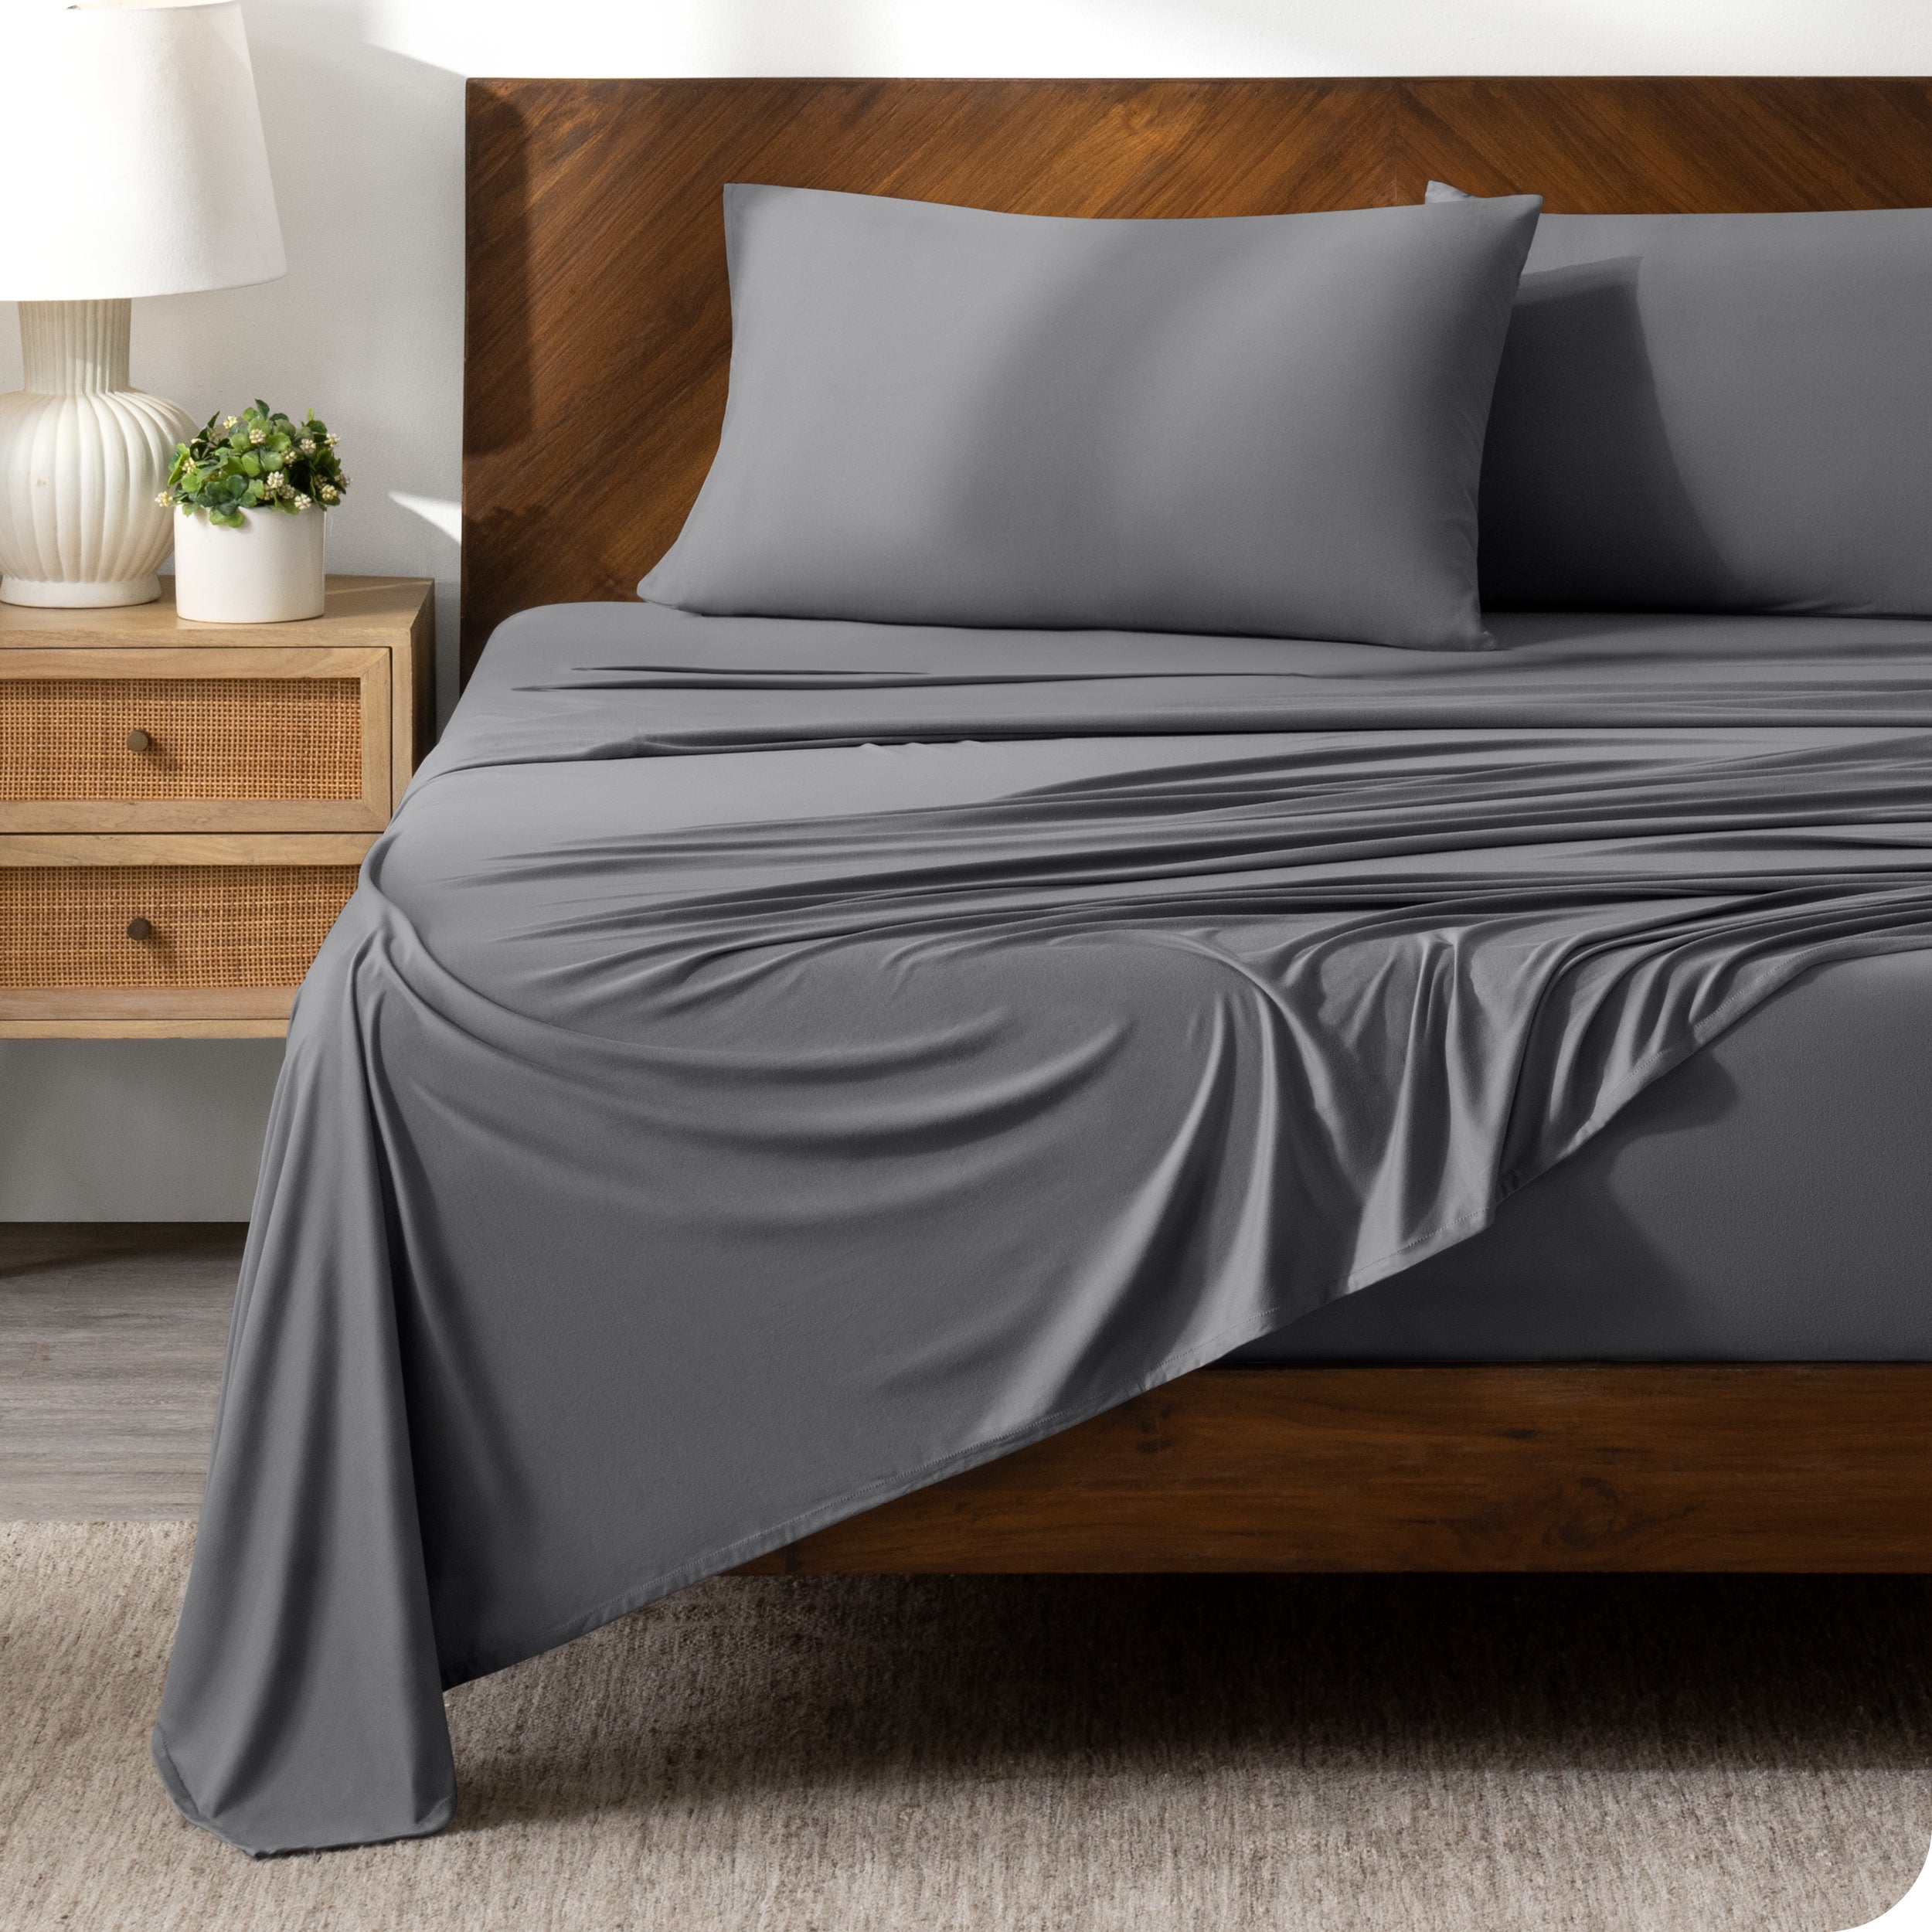 Grey sheet set on a bed with a dark wooden bed frame